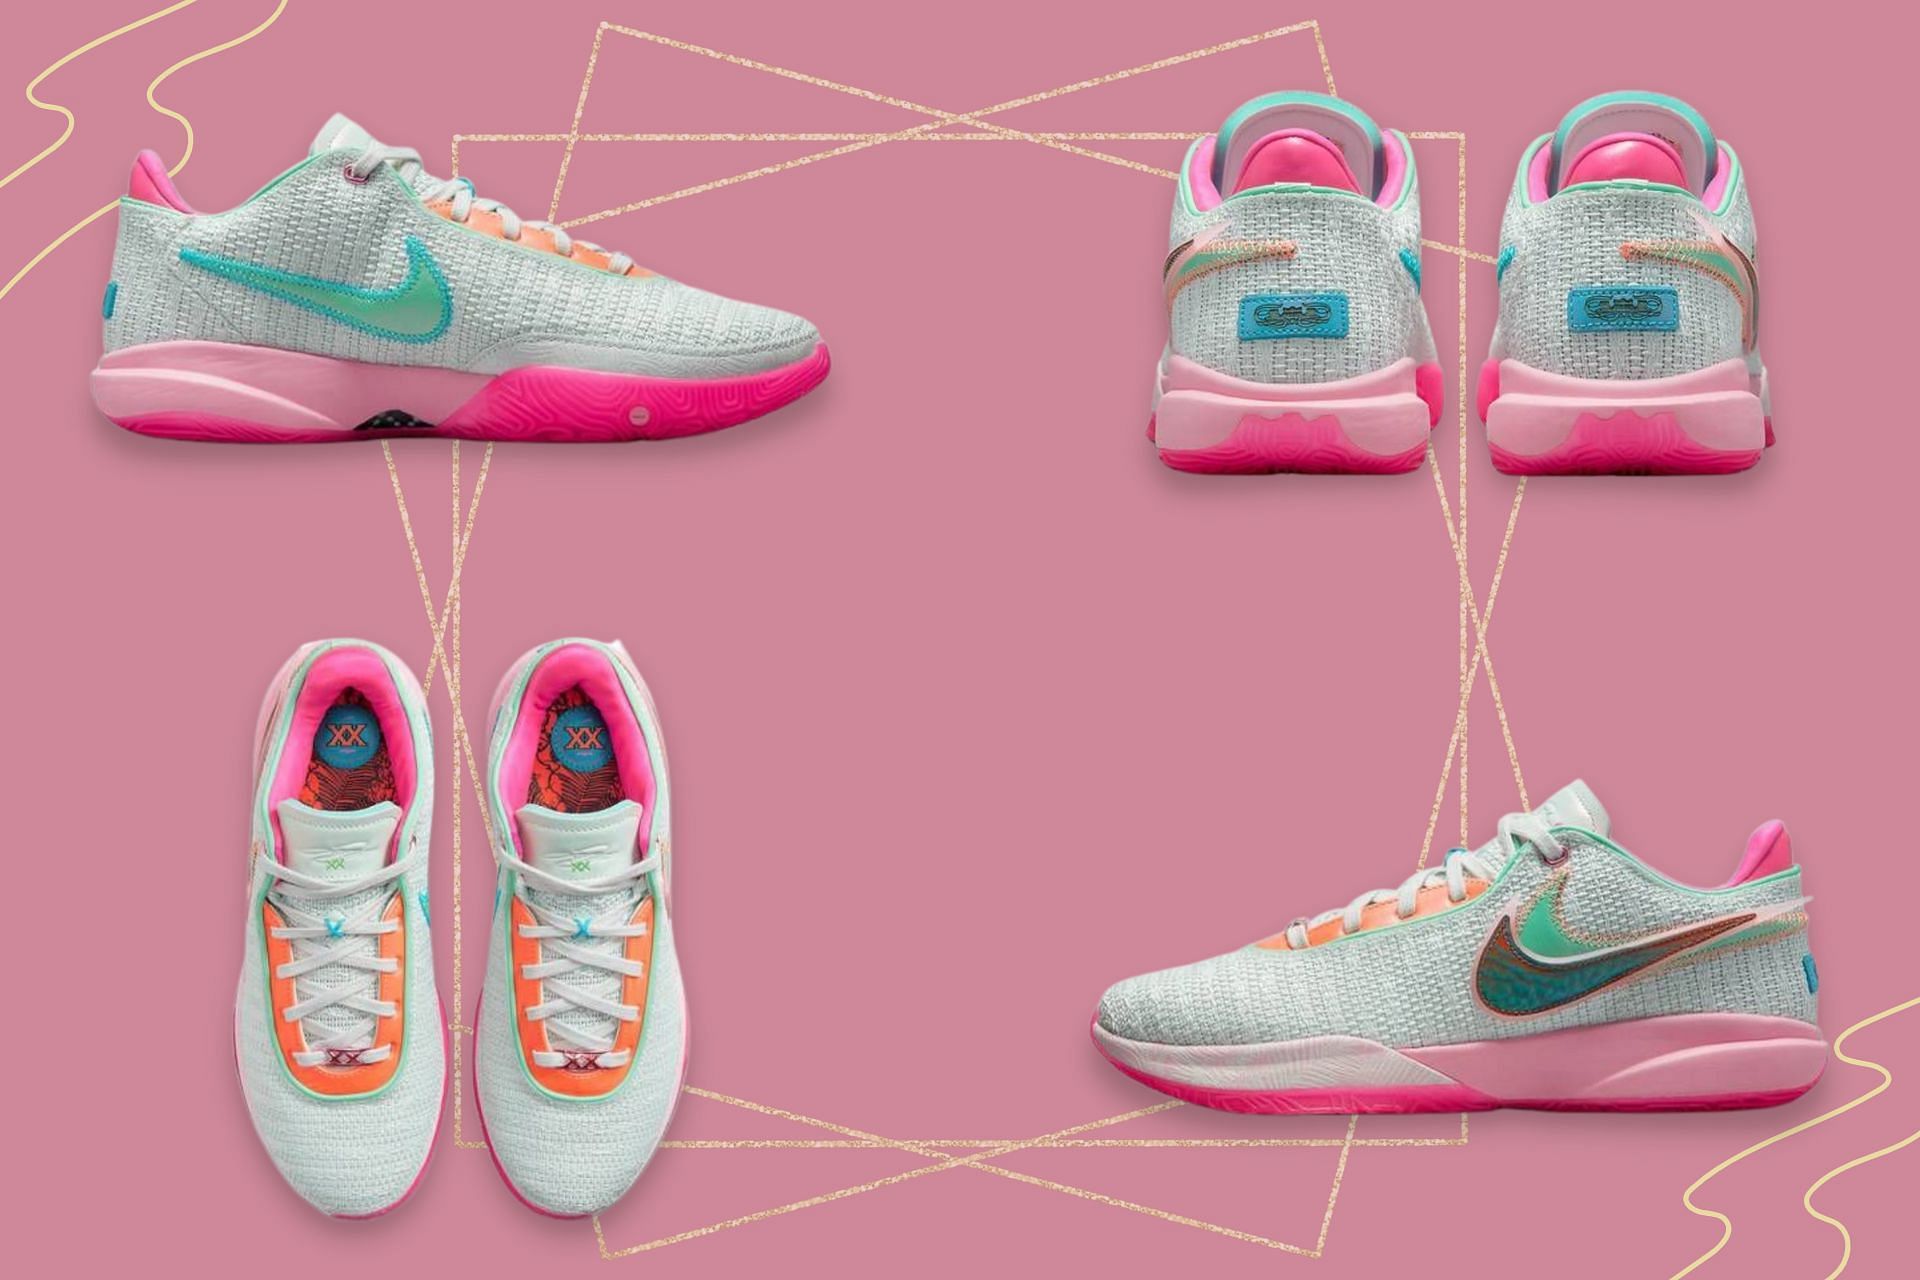 Here's a detailed look at the Time Machine colorway of the silhouette (Image via Sportskeeda)